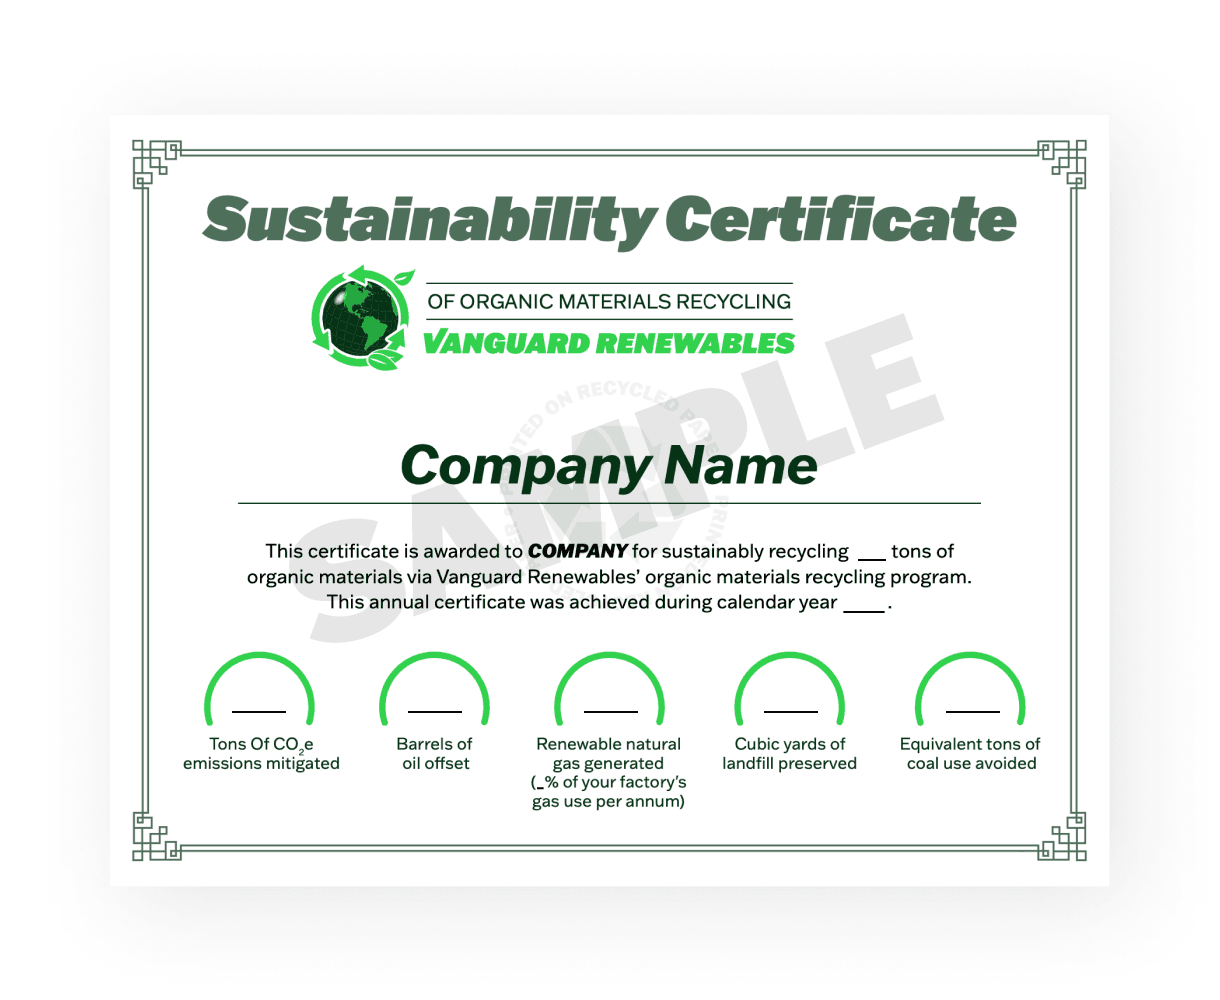 Sample sustainability certificate for commercial waste recycling, a food and beverage waste solution